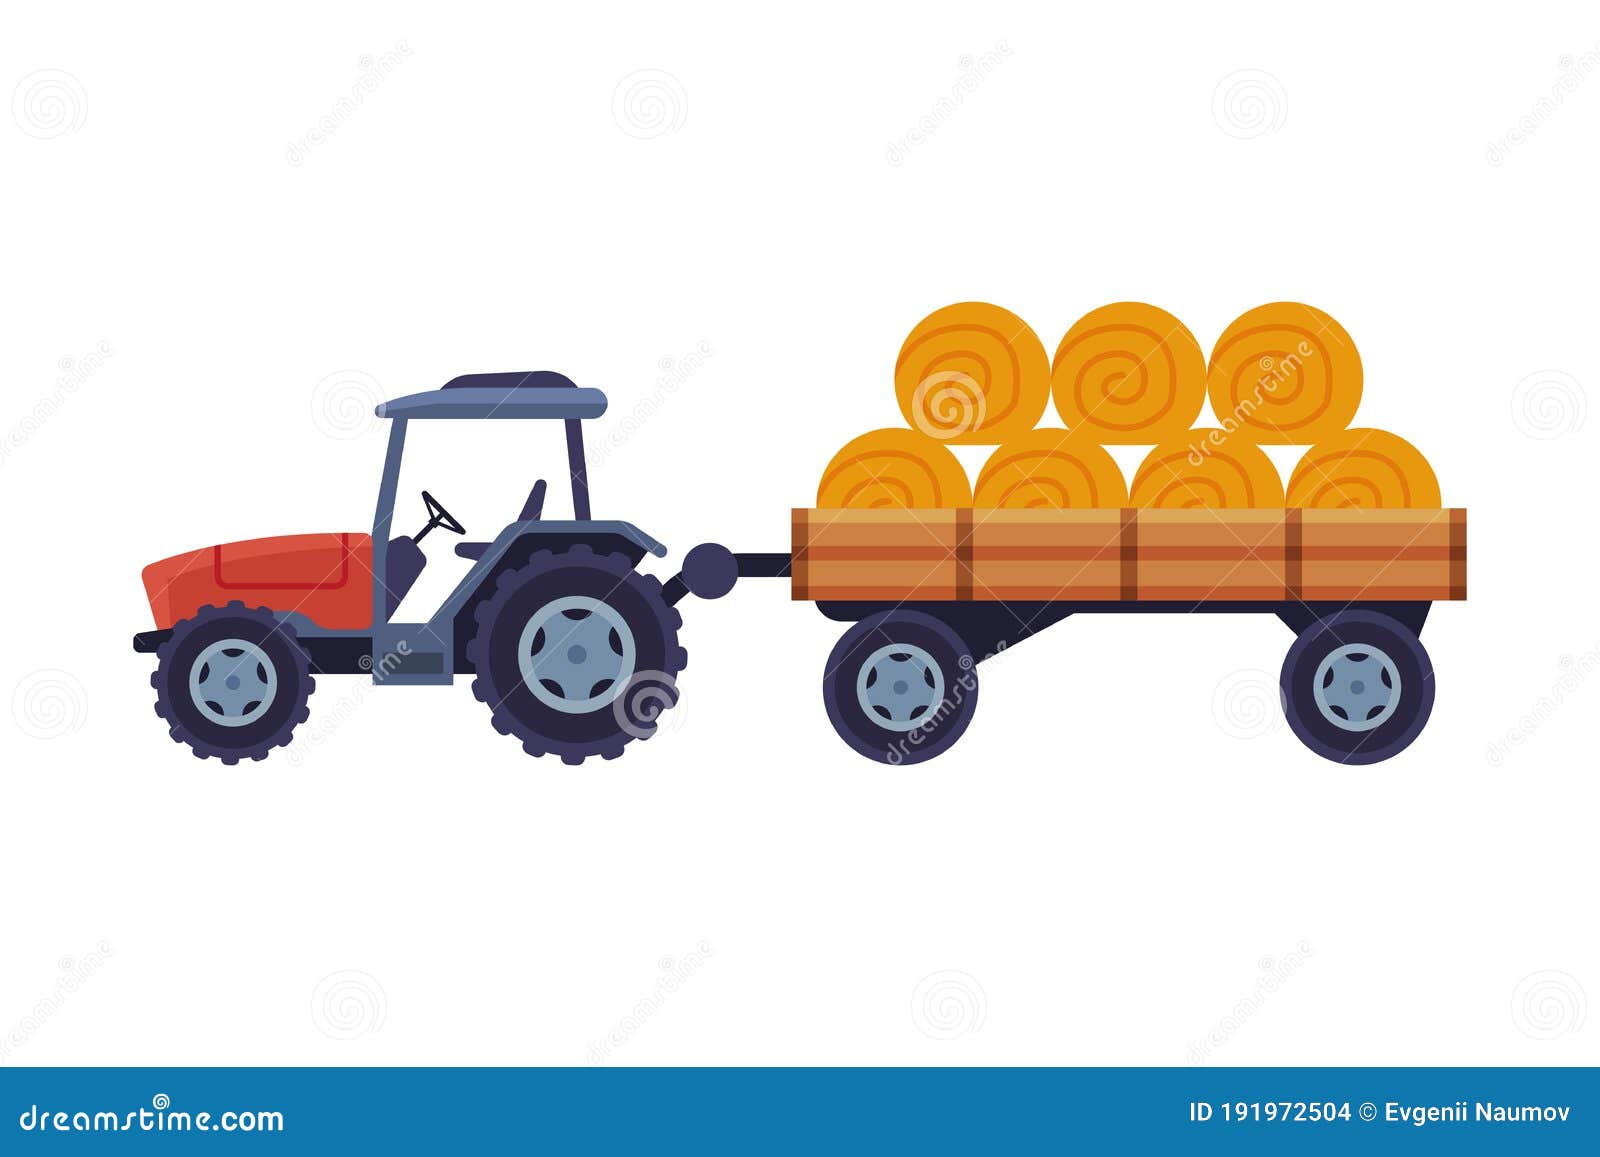 Tractor with Hay Bales in Cart Agricultural Machinery Cartoon Vector  Illustration on White Background Stock Vector - Illustration of country,  haystack: 191972504